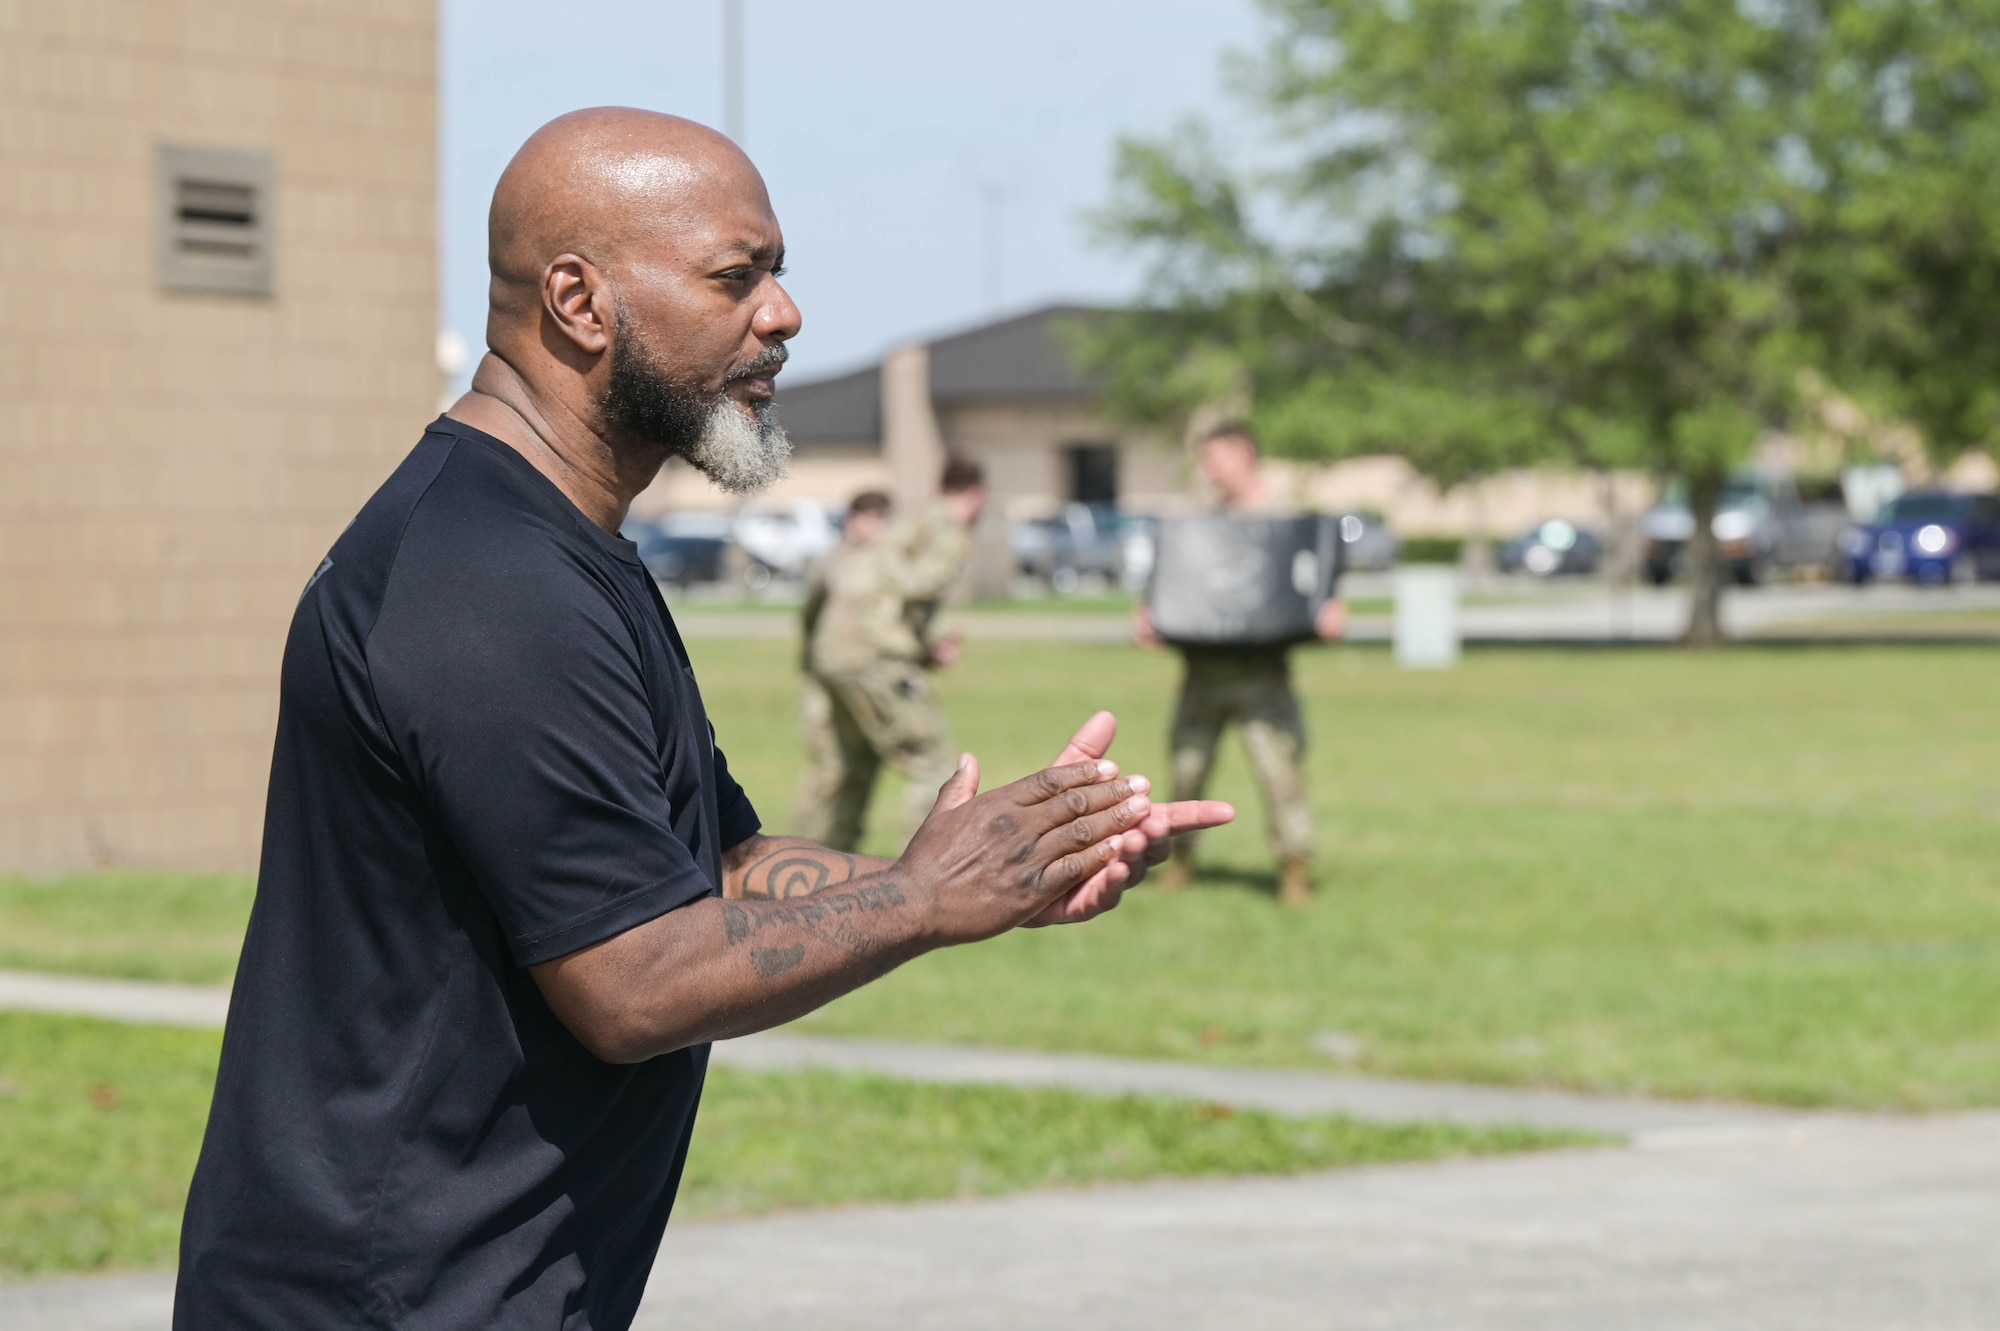 Bobby Cumby, retired security forces and Office of Special Investigations agent, and Krav Maga instructor, motivates the 23rd Security Forces Squadron airmen during situational training rounds, April 13, 2022, at Moody Air Force Base, Georgia. Adding new skills to these defenders’ toolbelts will continue developing security forces in more than just the combative aspect. (U.S. Air Force photo by Senior Airman Rebeckah Medeiros)